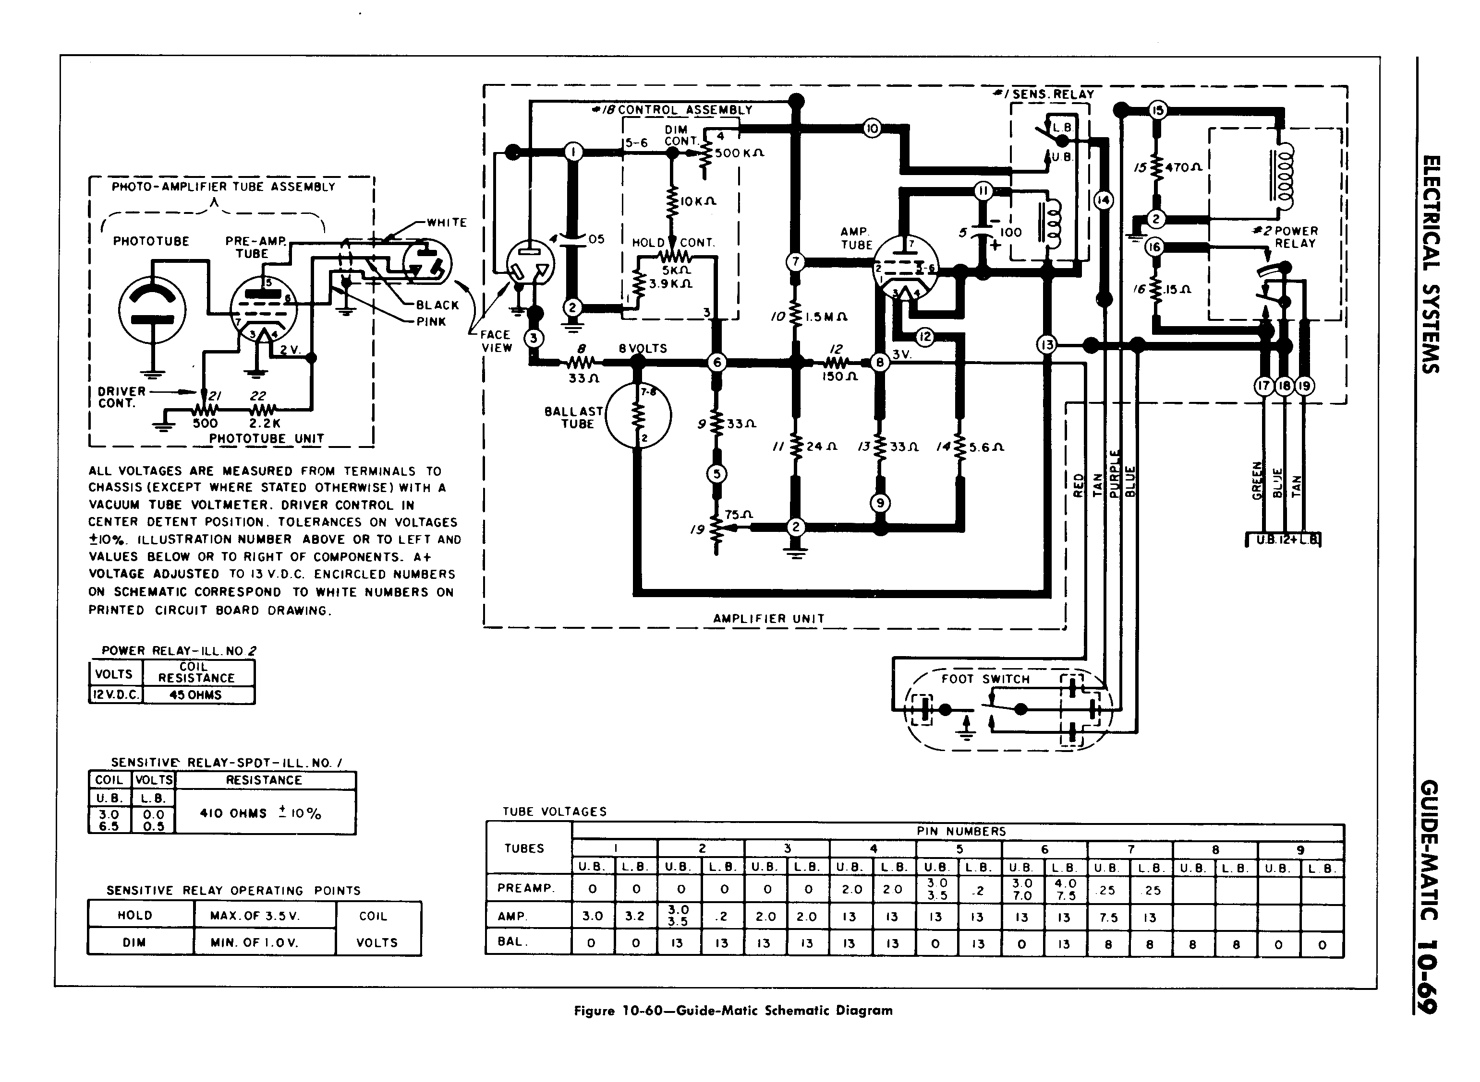 n_11 1960 Buick Shop Manual - Electrical Systems-069-069.jpg